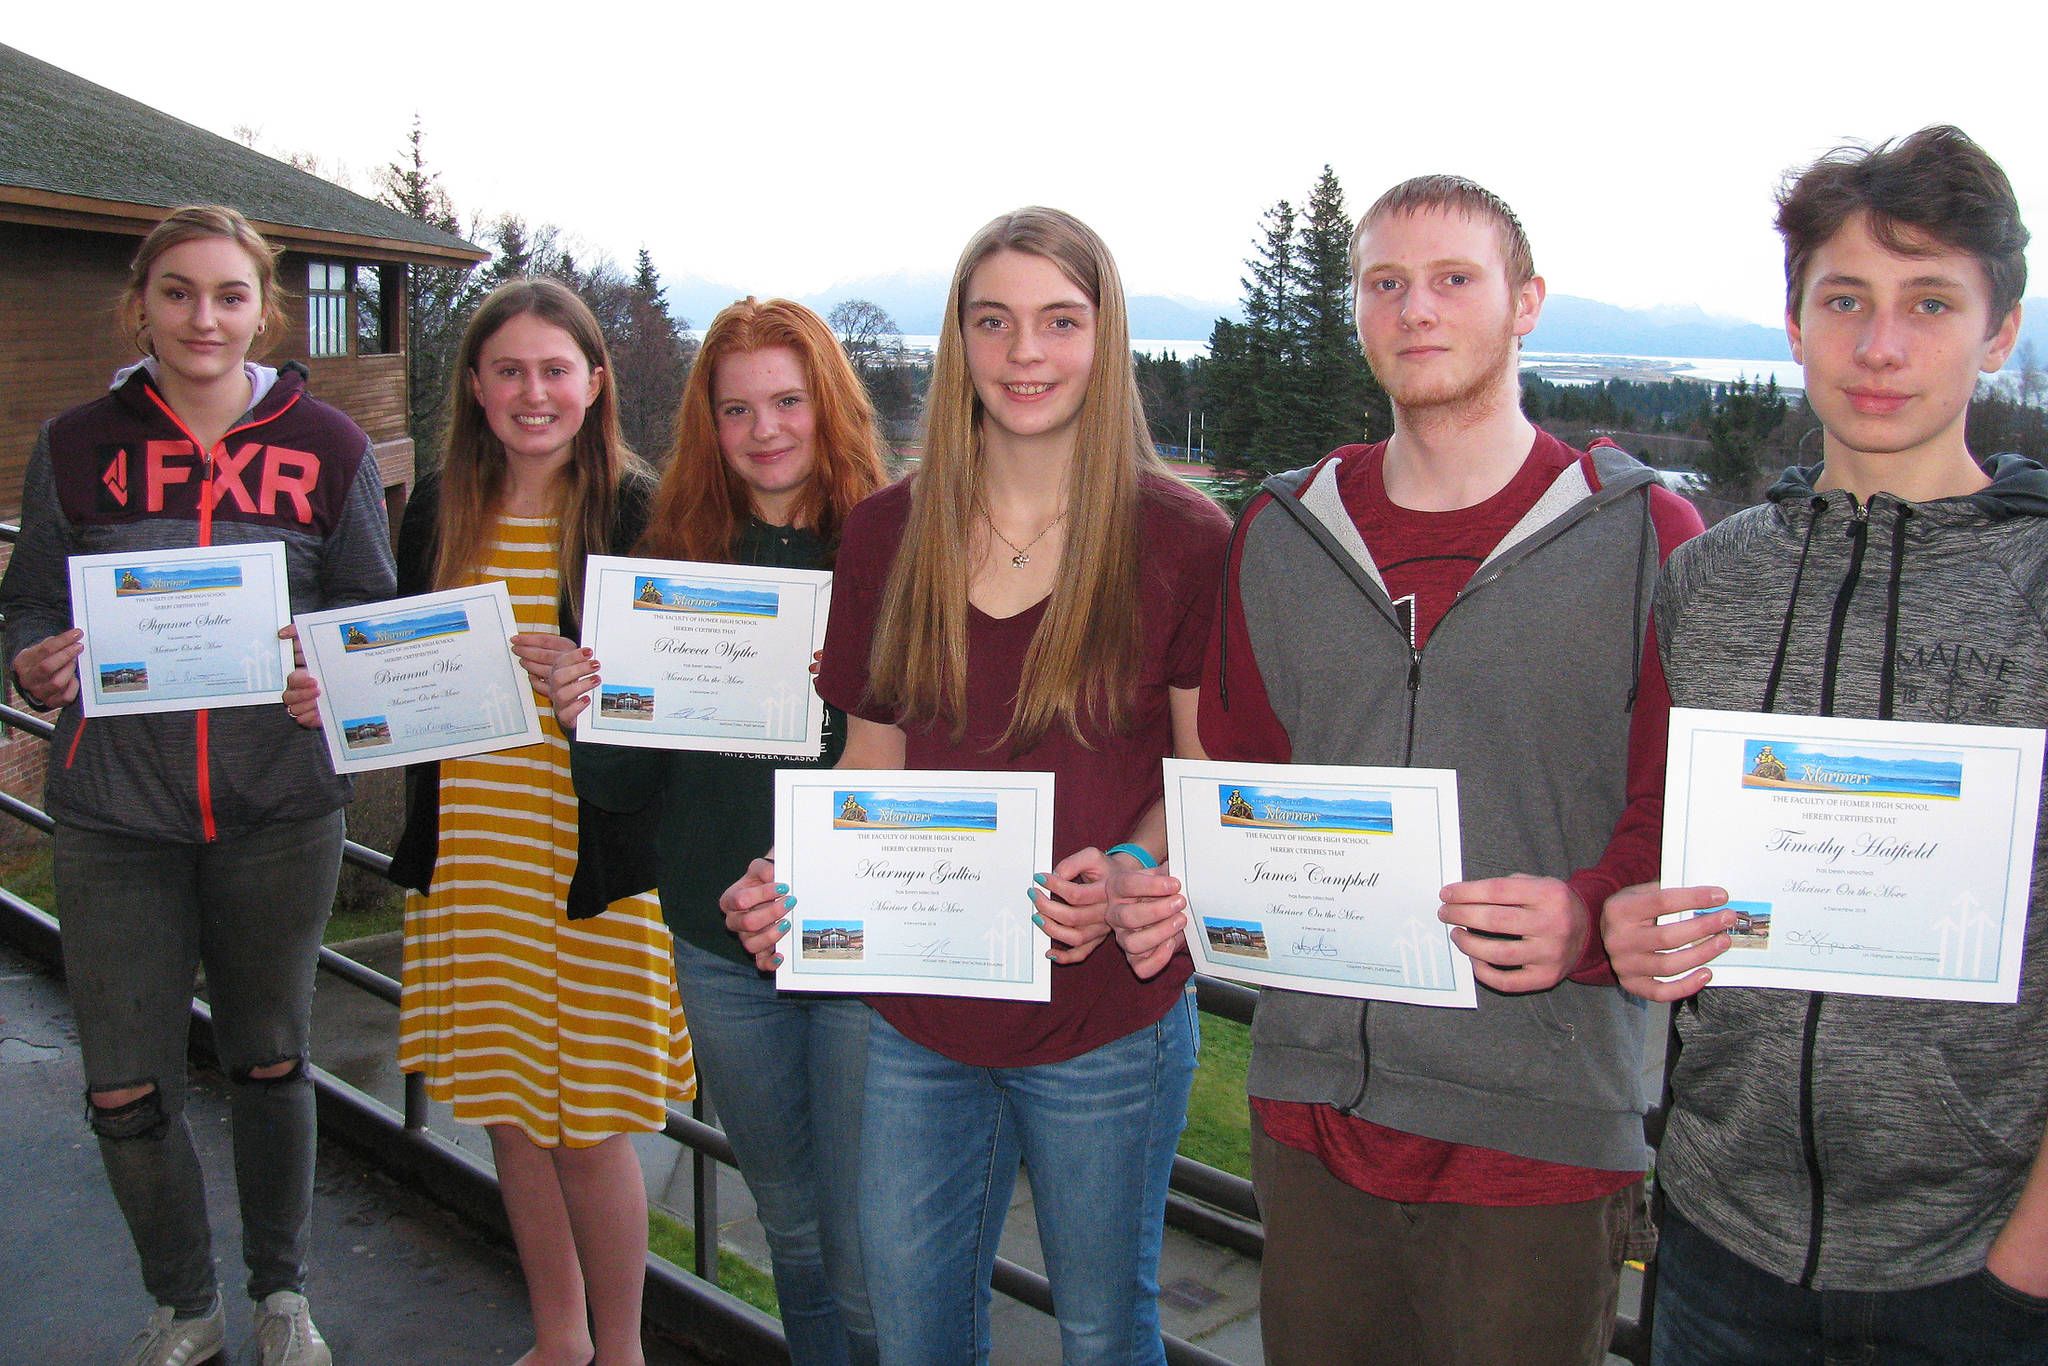 <span class="neFMT neFMT_PhotoCredit">Photo courtesy Paul Story</span>                                Pictured left to right are Homer High School students Shyanne Sallee, Brianna Wise, Rebecca Wythe, Karmyn Gallios, James Campbell and Timmy Hatfield, winners of this quarter’s Mariners on the Move awards. Winners not pictured are Katie Lane and Alex Miller.